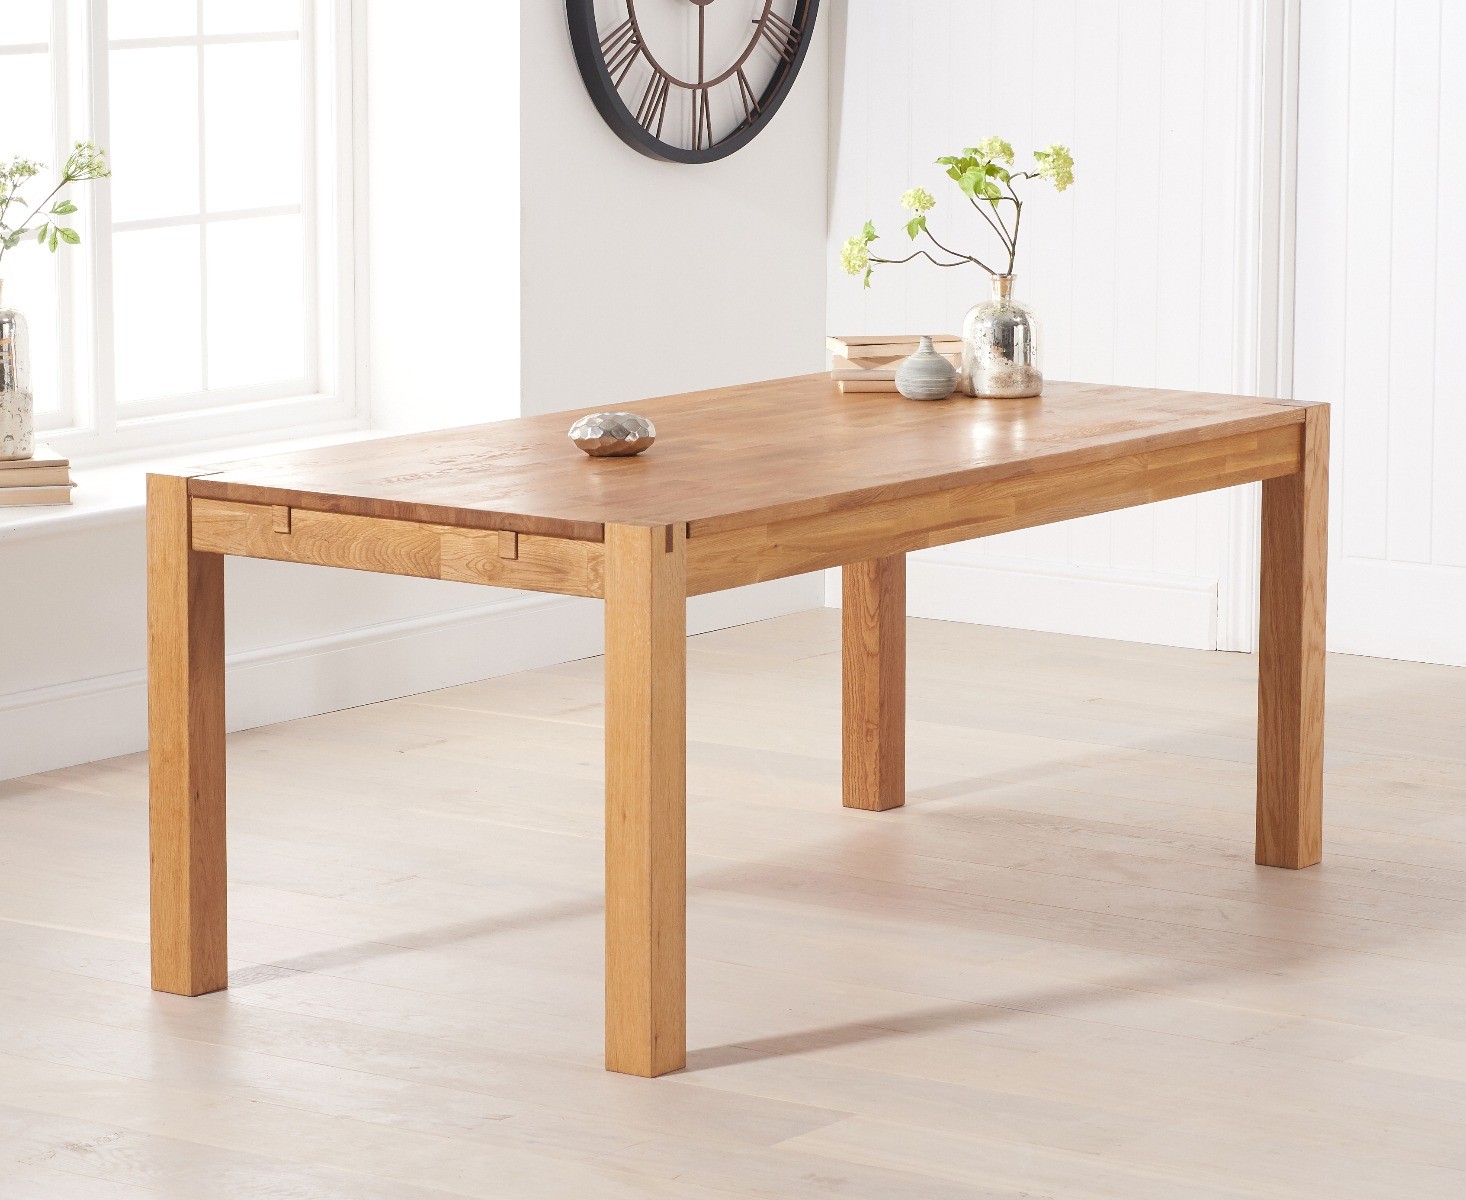 Photo 1 of Thetford 180cm oak table with larson grey faux leather benches